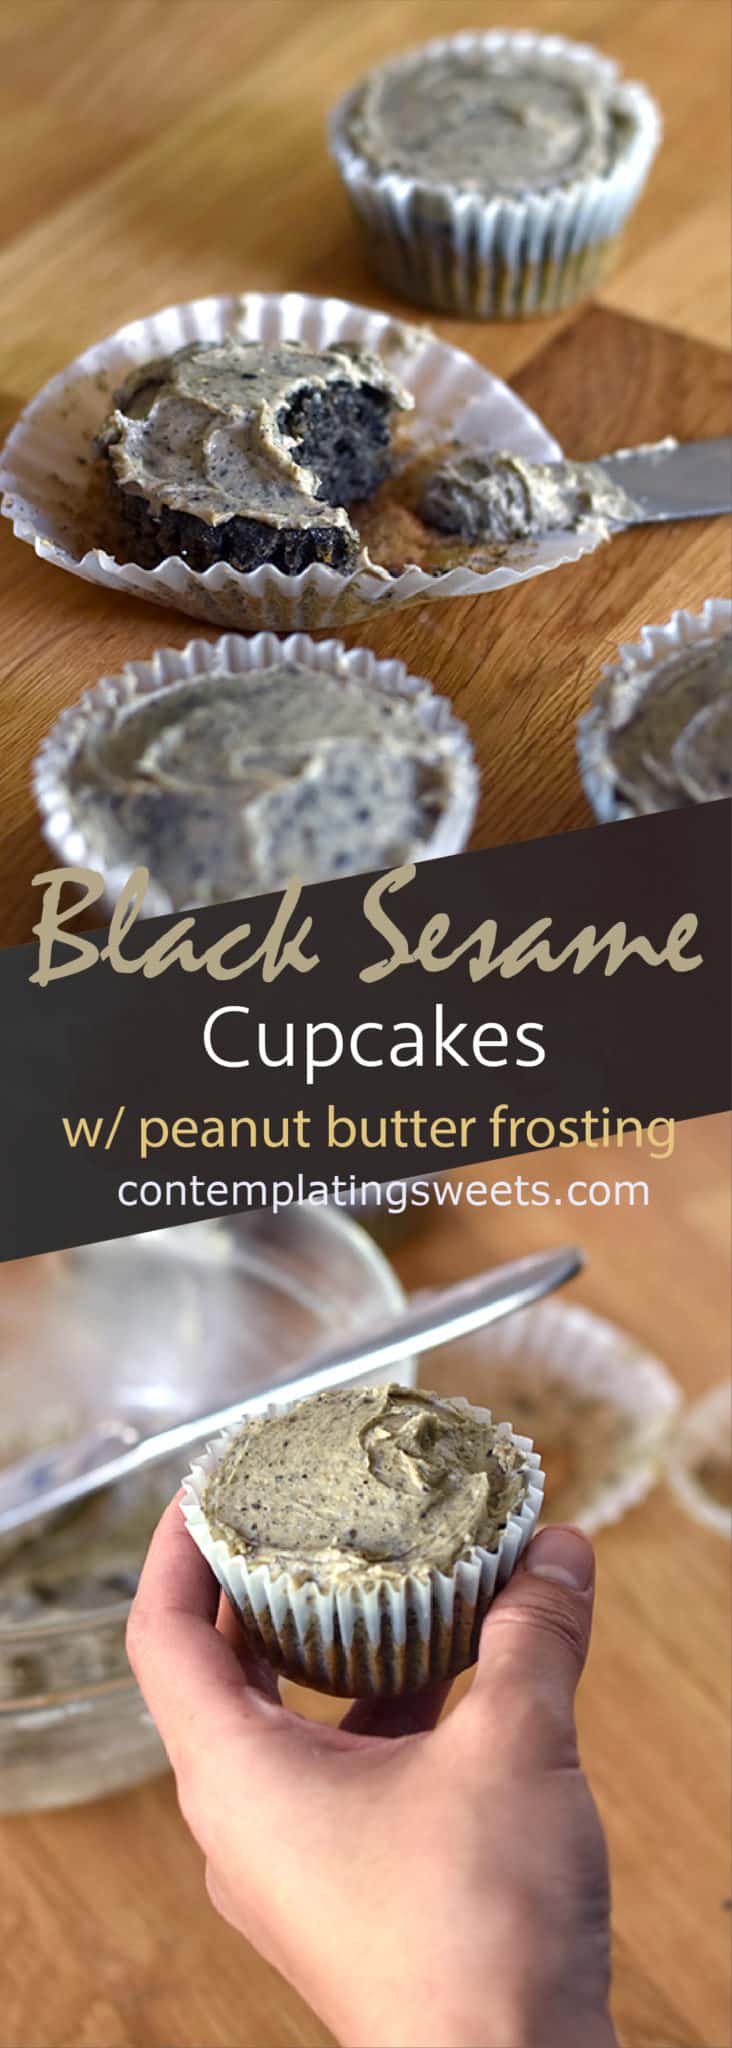 Black Sesame Cupcakes With Peanut Butter Frosting: These Lightly Sweet Black Sesame Cupcakes Are Full Of Toasty Sesame Flavor, And Pair Perfectly With The Peanut Butter Sesame Frosting. 